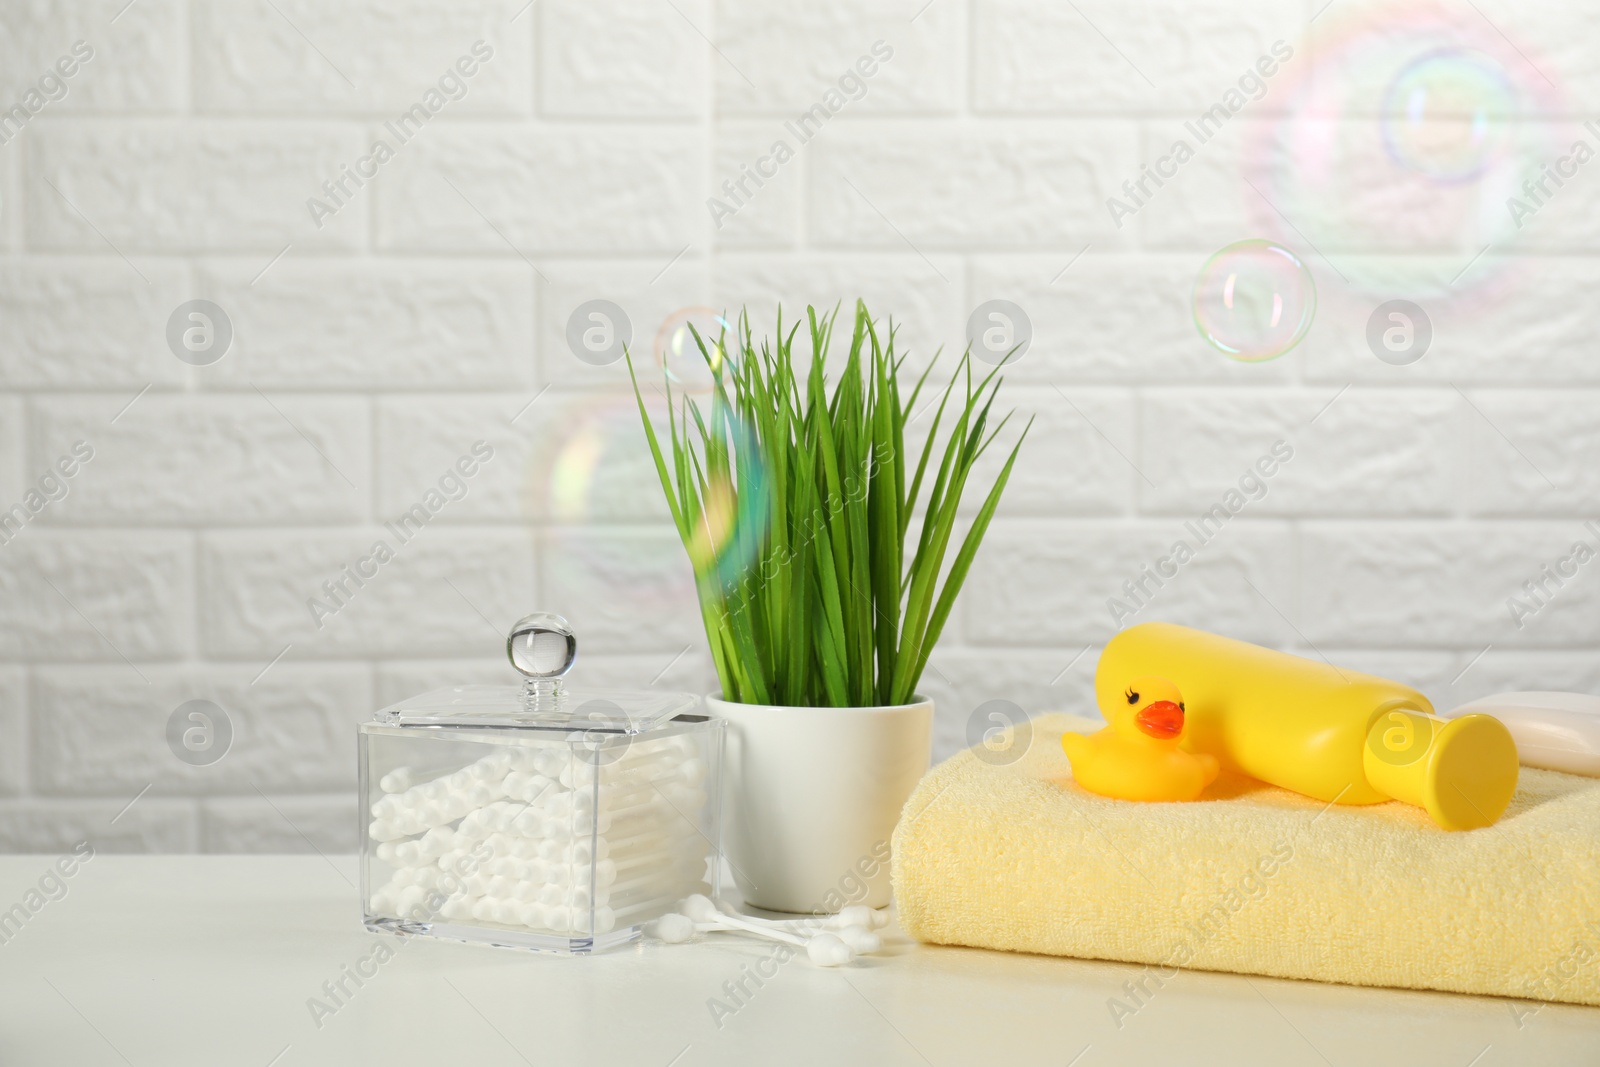 Photo of Baby bath accessories. Towel, cosmetic products, cotton swabs and toy duck on white table against brick wall